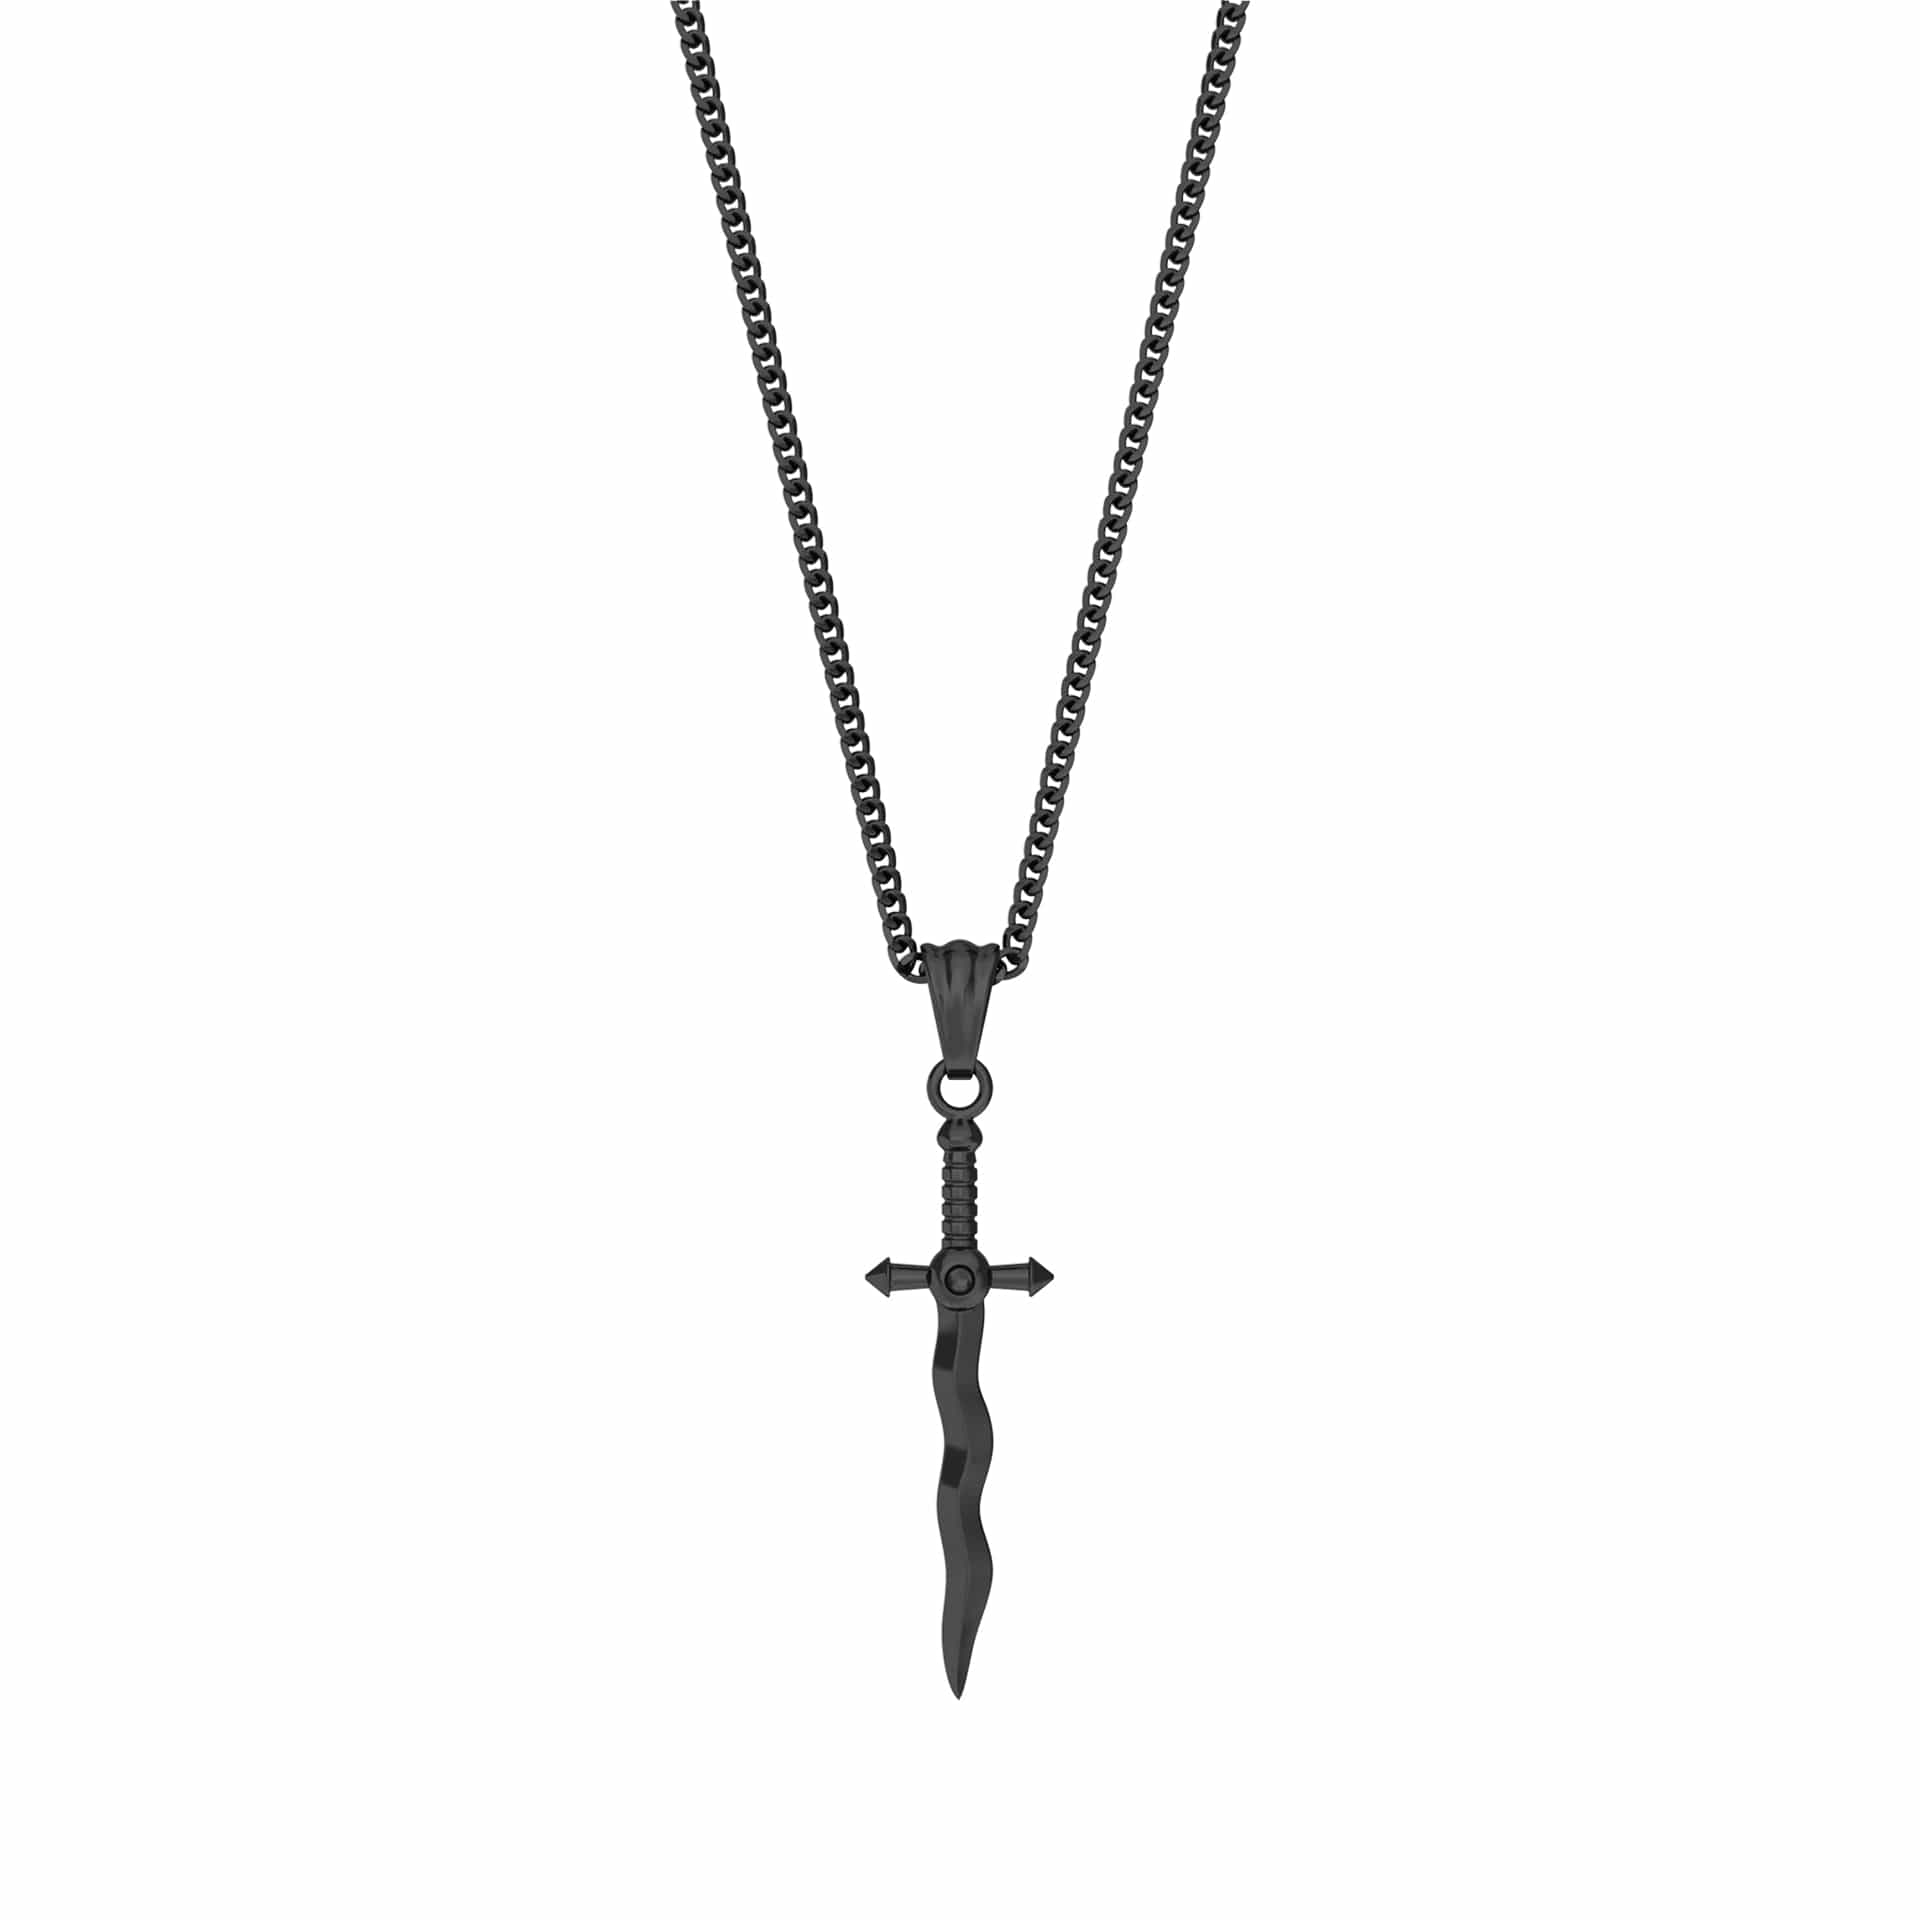 Mister Inferno Blade Necklace